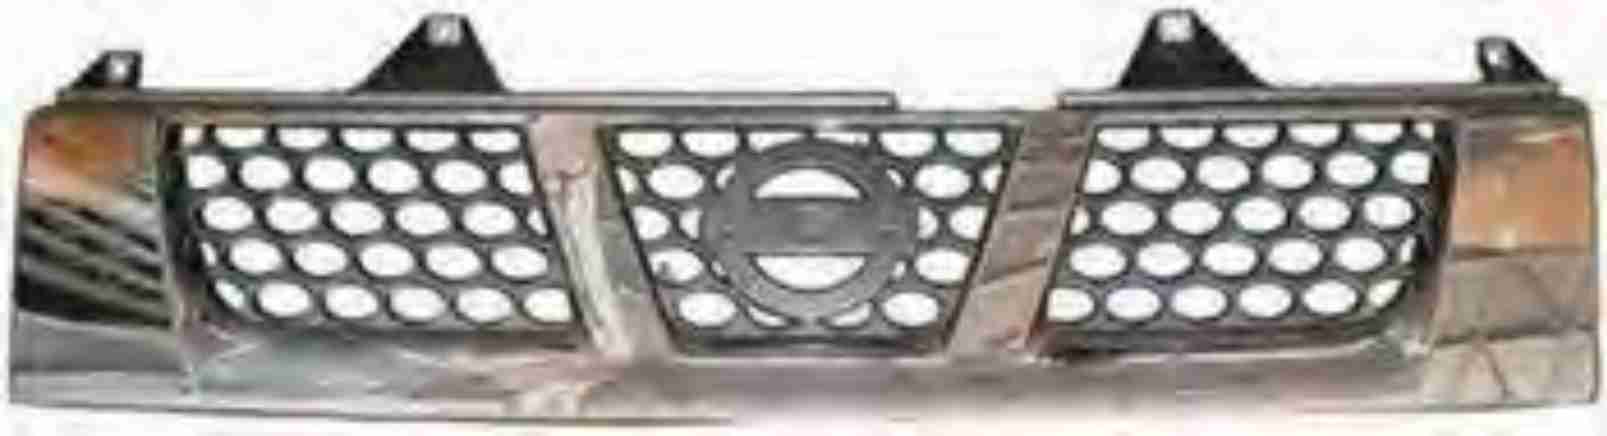 GRI502127 - 2005748 - FRONTIER 01 GRILLE